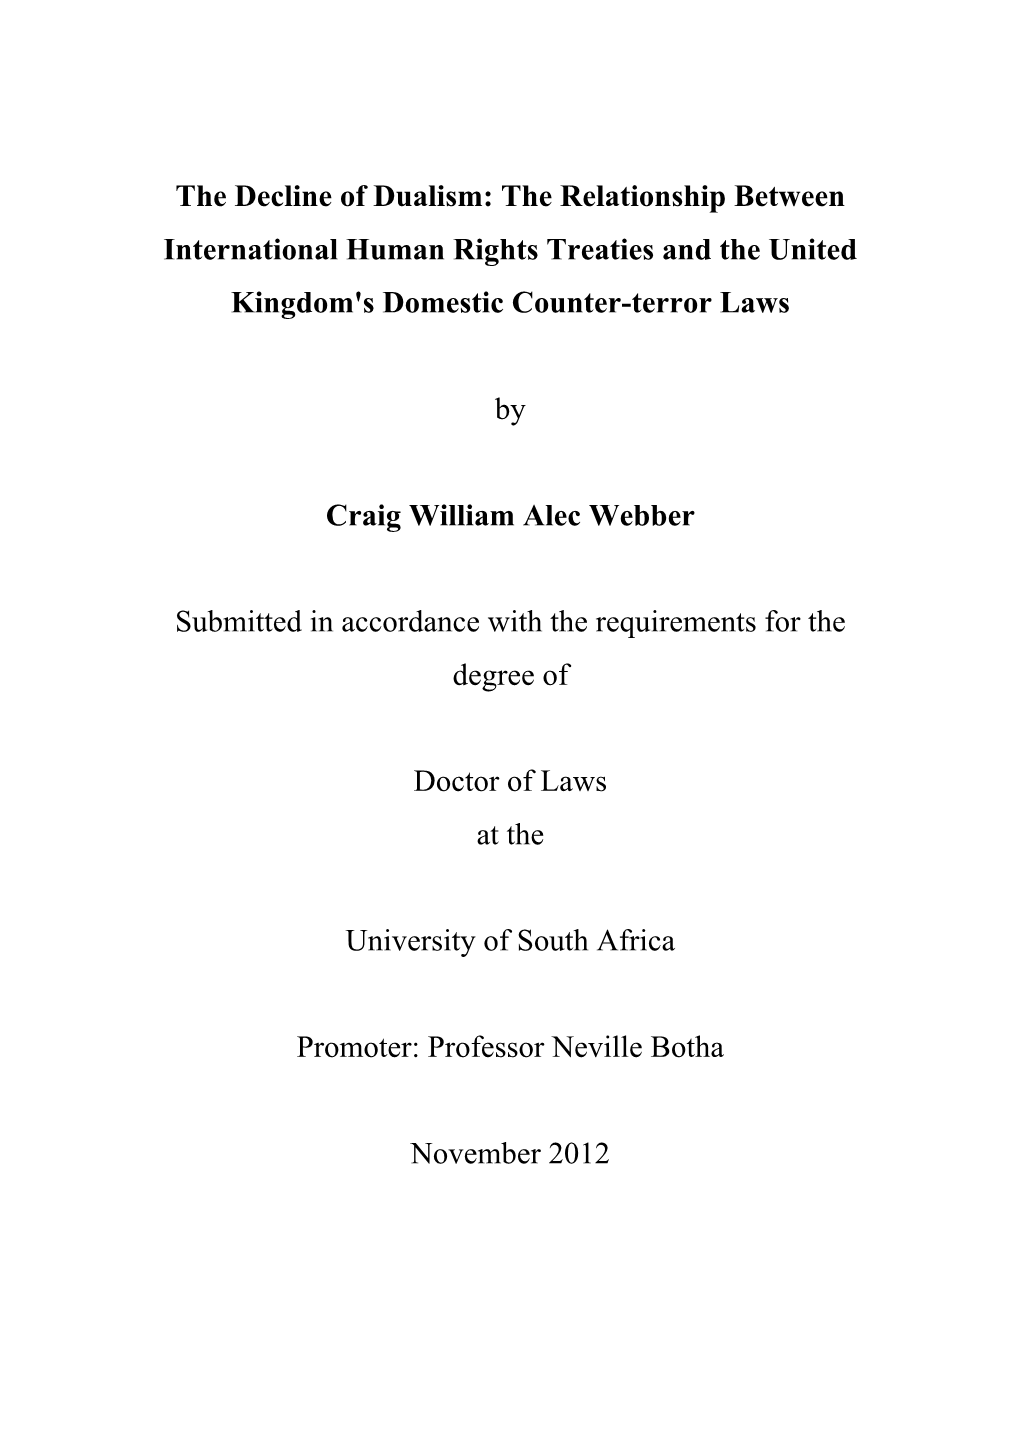 The Decline of Dualism: the Relationship Between International Human Rights Treaties and the United Kingdom's Domestic Counter-Terror Laws